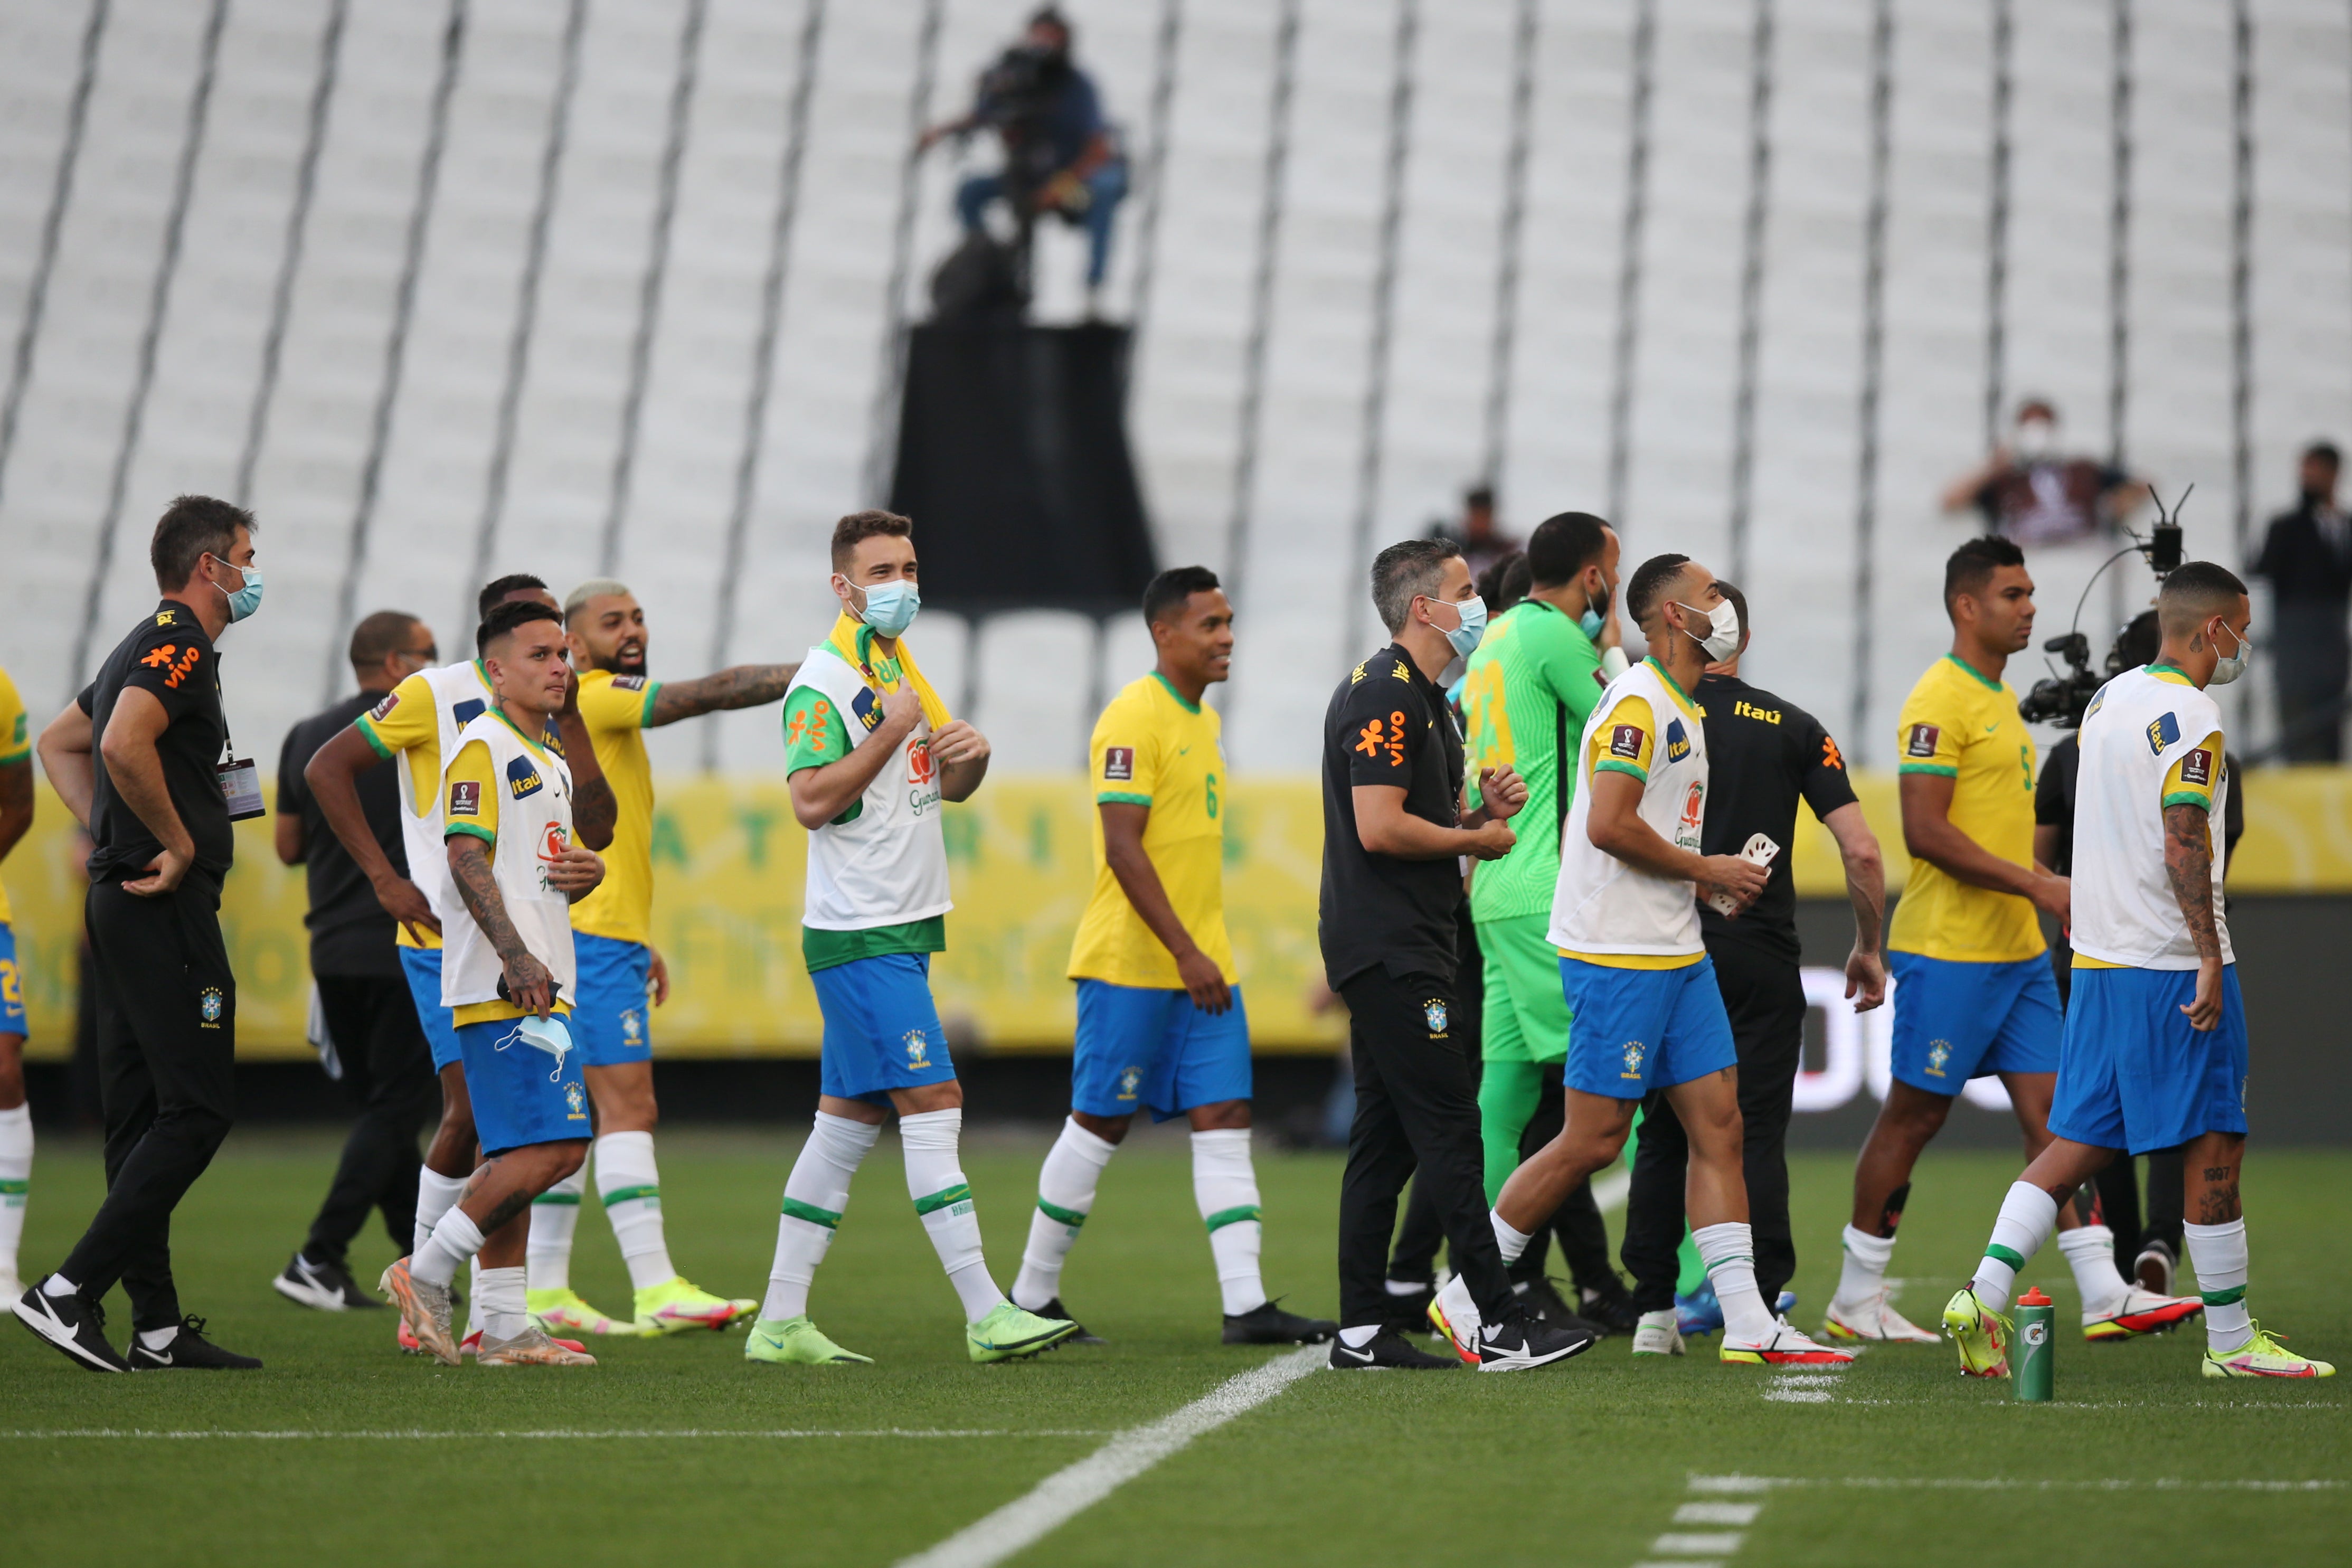 Brazil’s match against Argentina was halted by officials after a row over quarantine rules